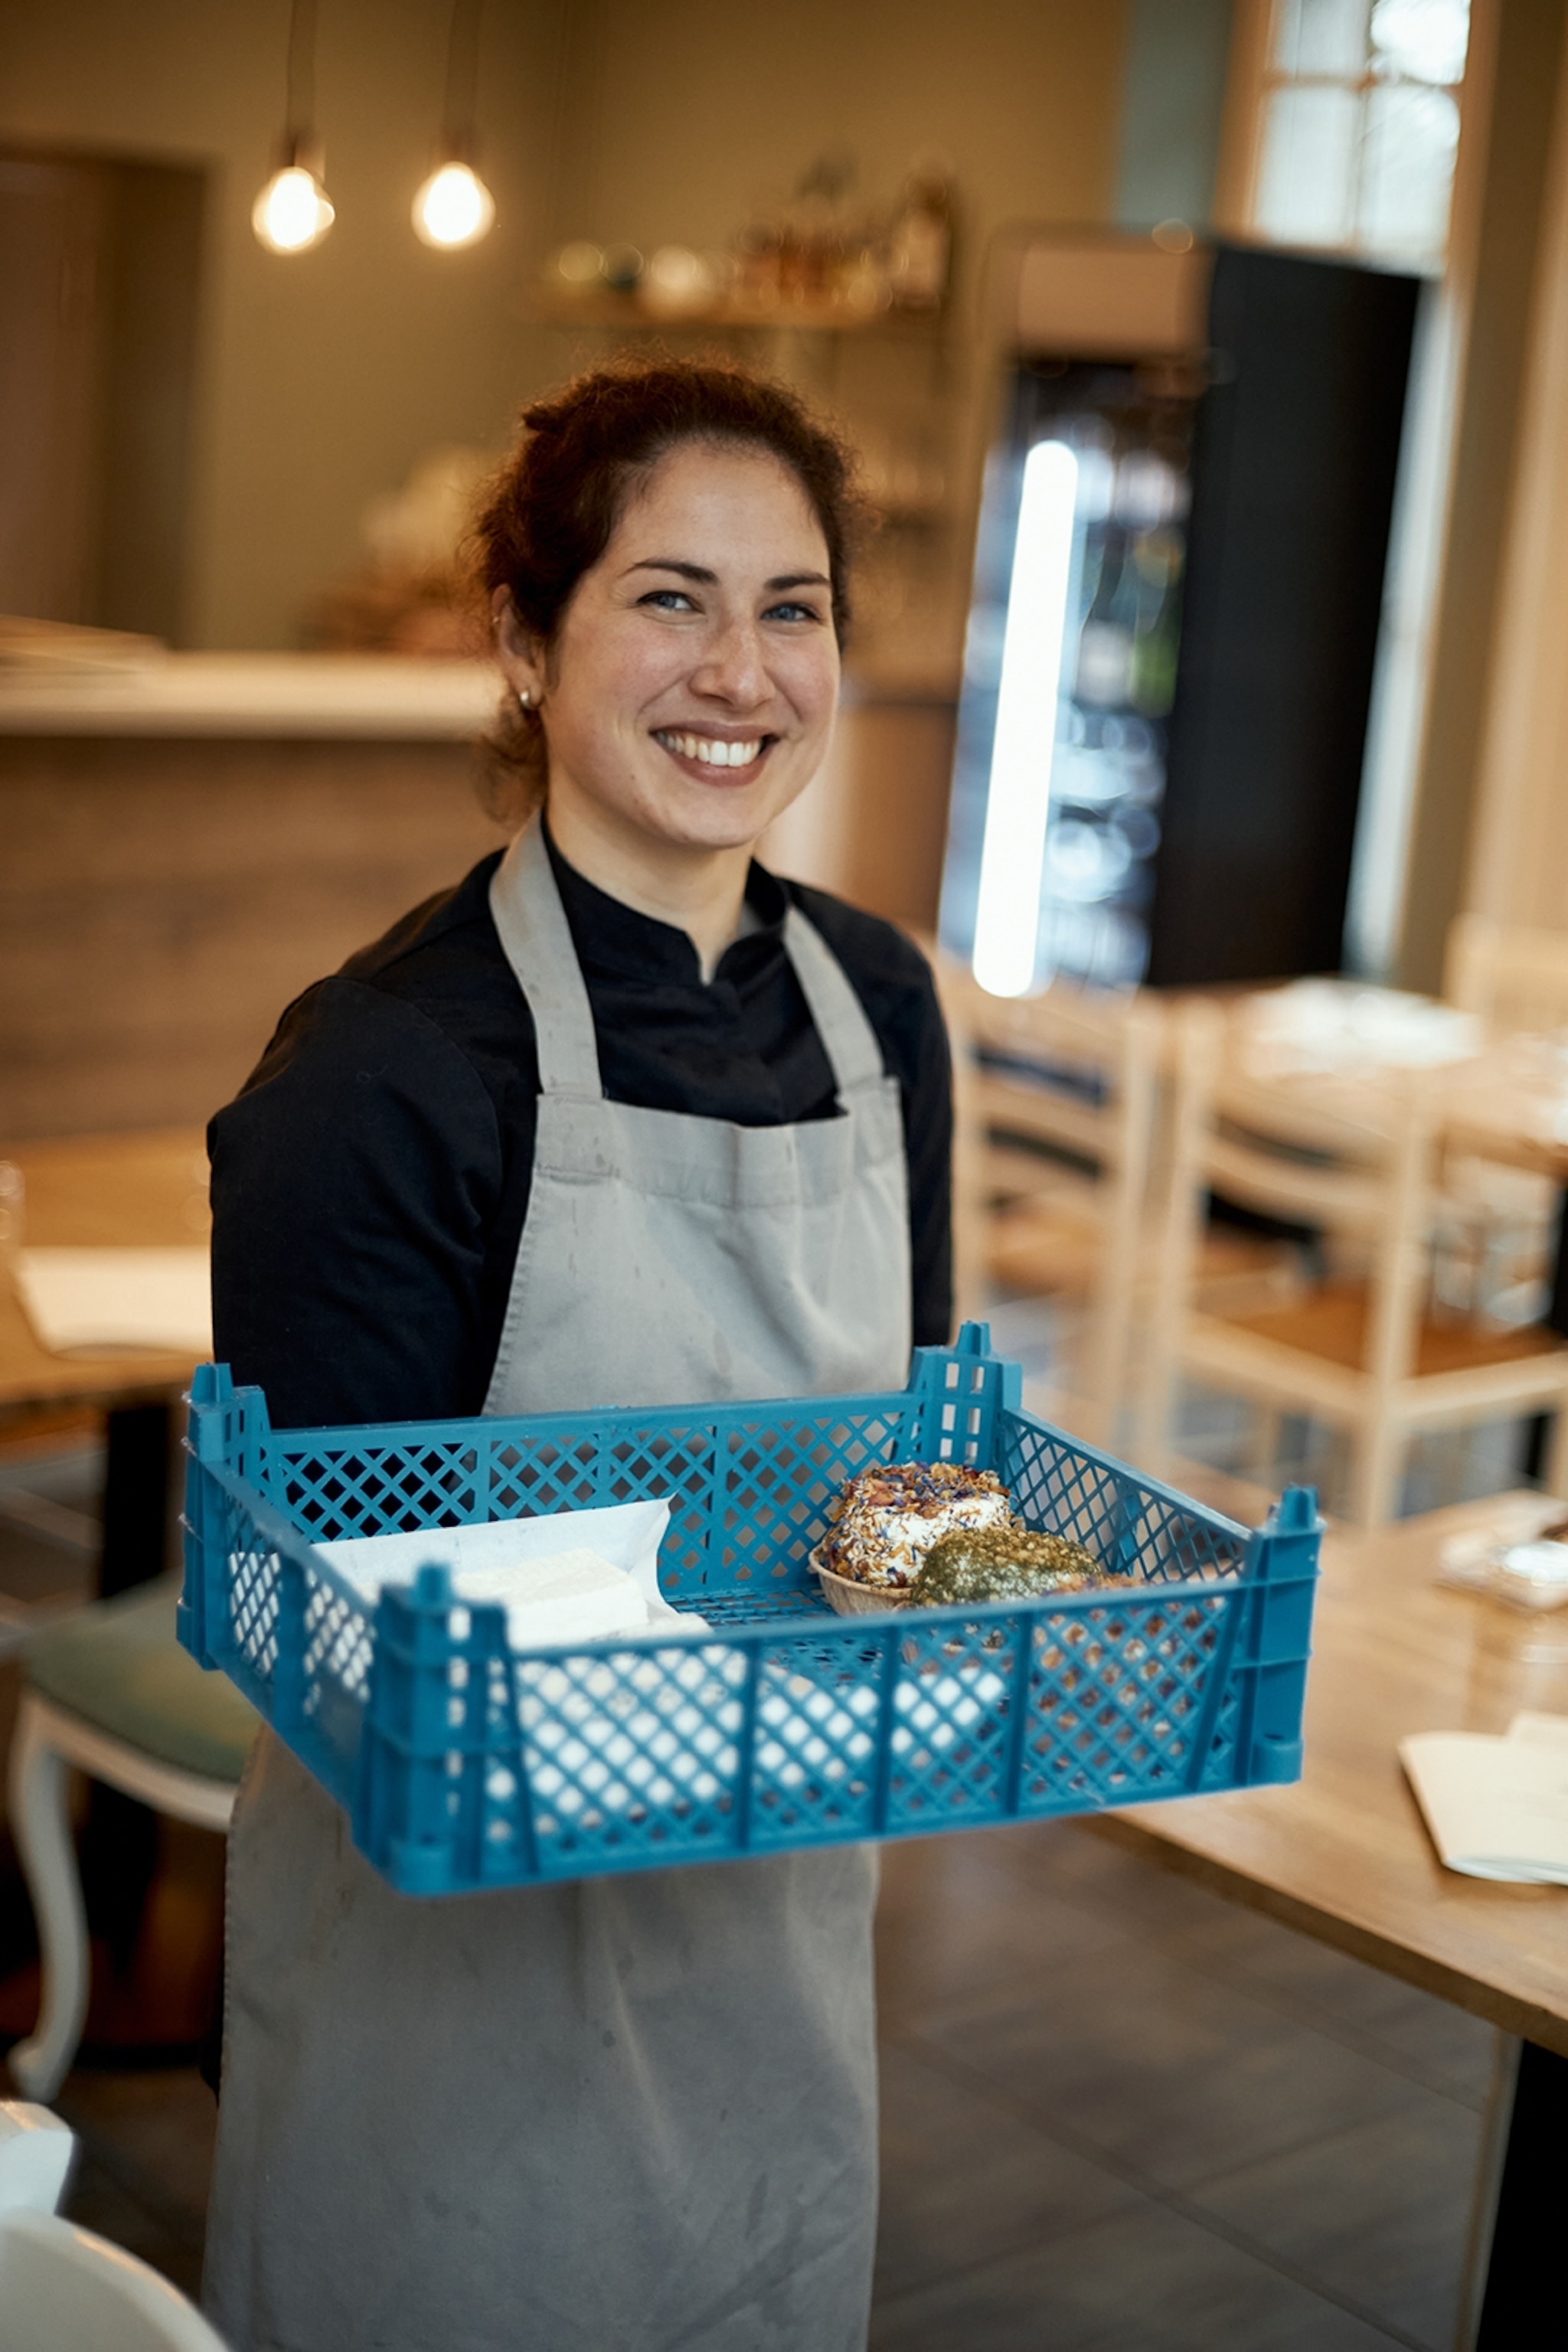 A female chef holding a crate of fresh produce and smiling.